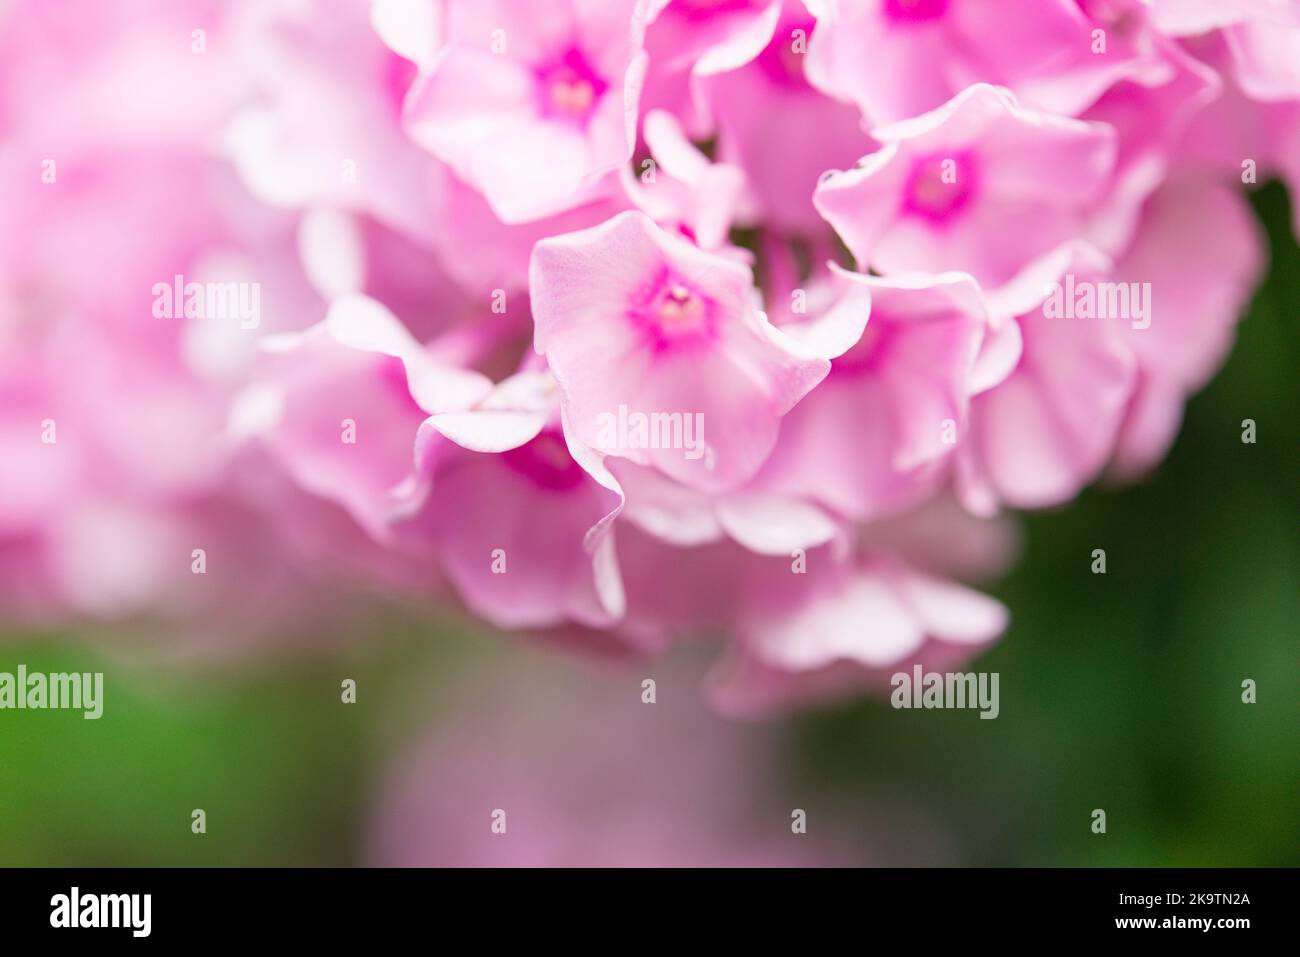 Garden phlox. Phlox paniculata, bright summer flowers. Blooming branches of phlox in the garden on a sunny day. Soft blurred selective focus. Stock Photo